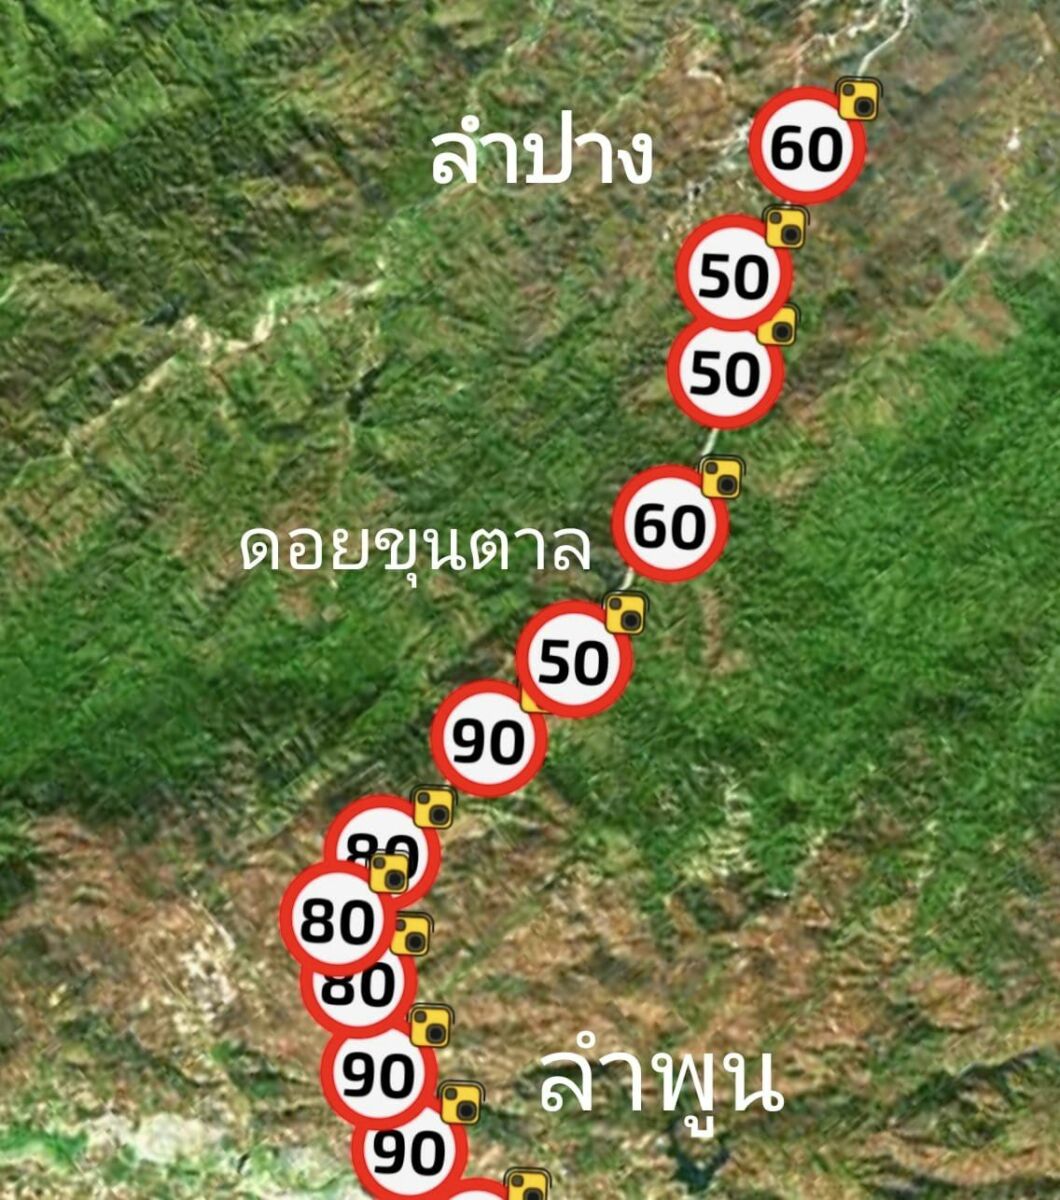 New speed cameras on Lamphun-Lampang route spark debate | News by Thaiger